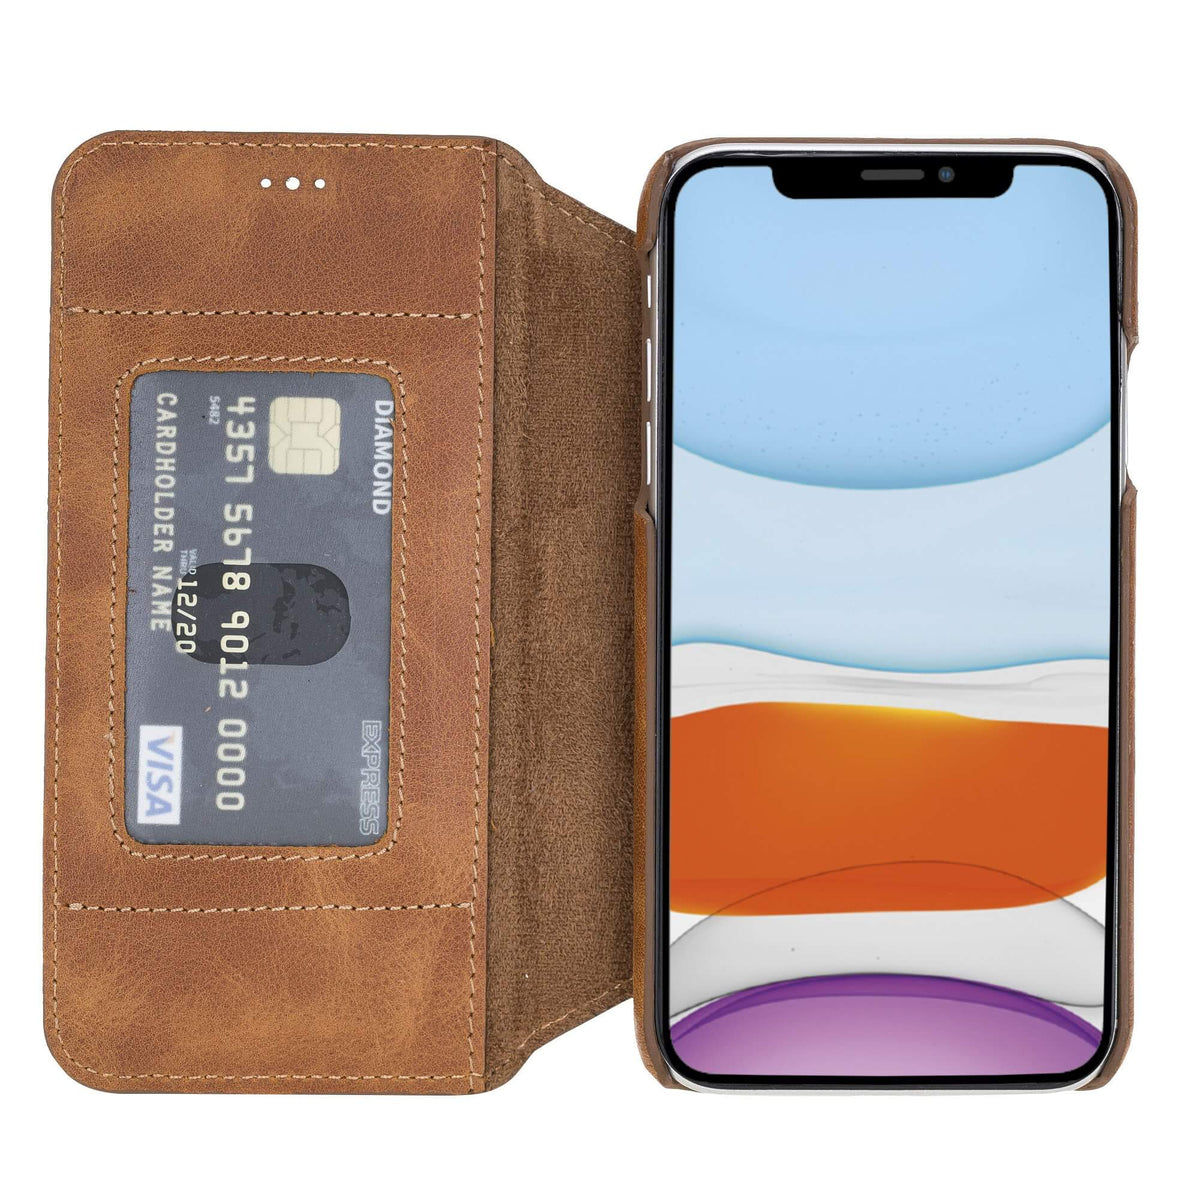 Top Overvloedig warmte Venice iPhone XR Leather Slim Wallet Case - Venito – Venito Leather